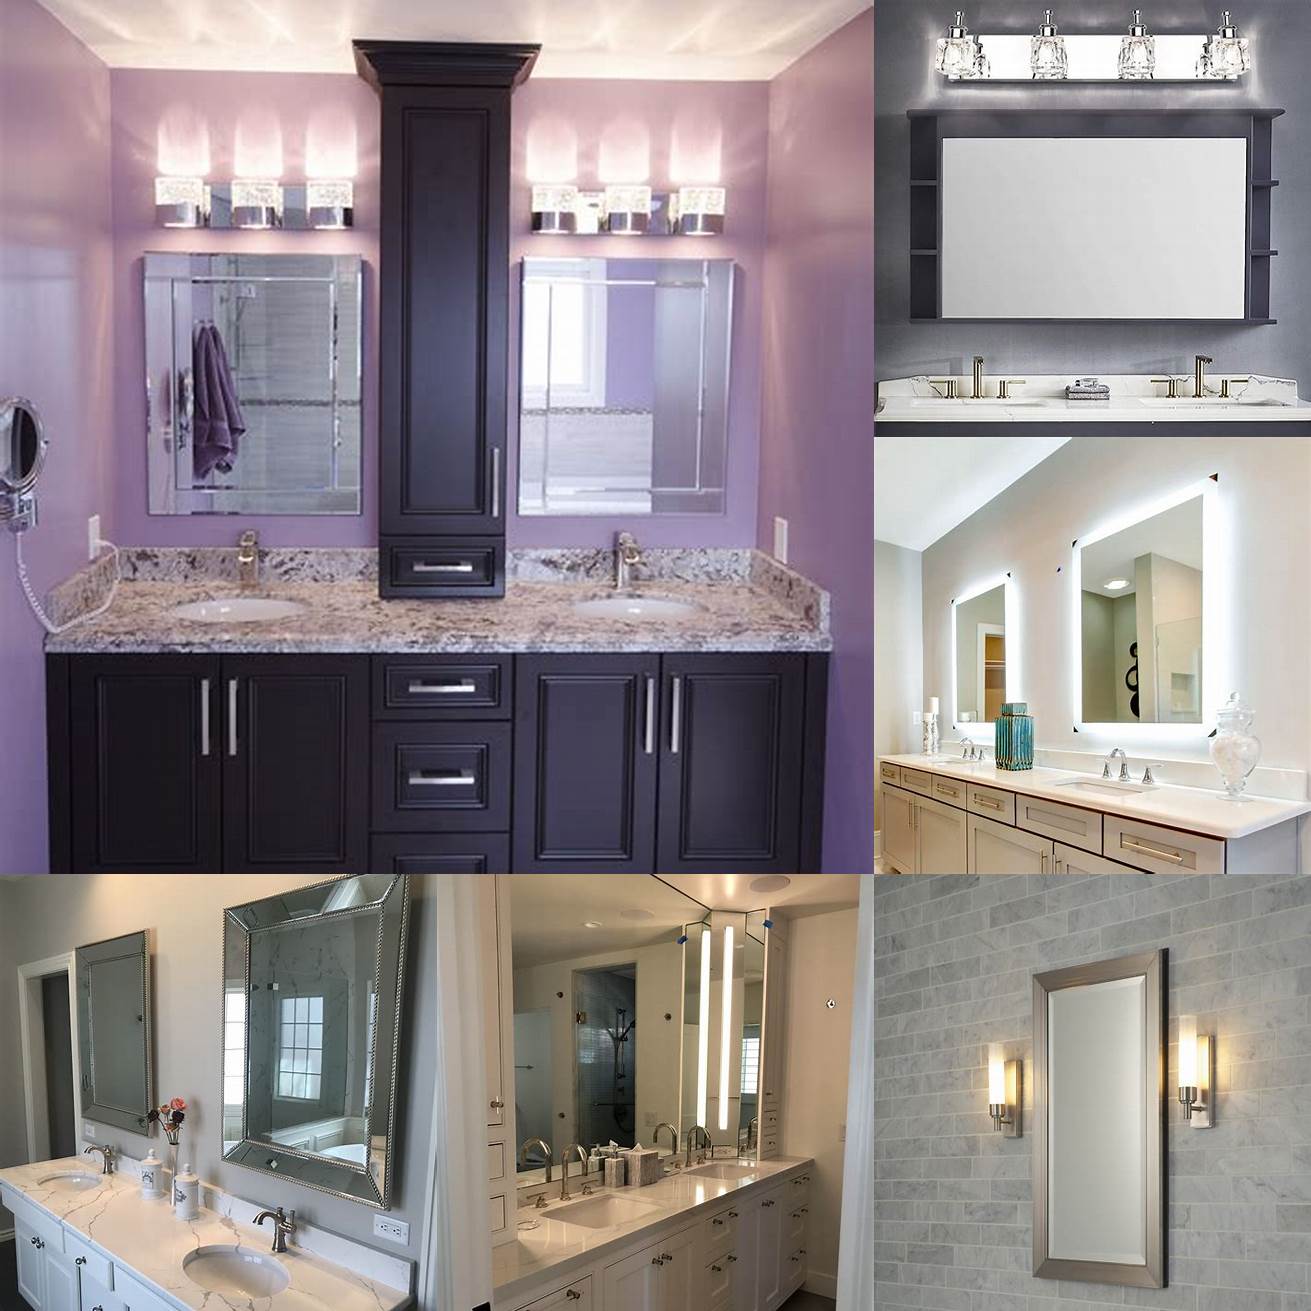 Photos of clearance vanities with different mirror and lighting options